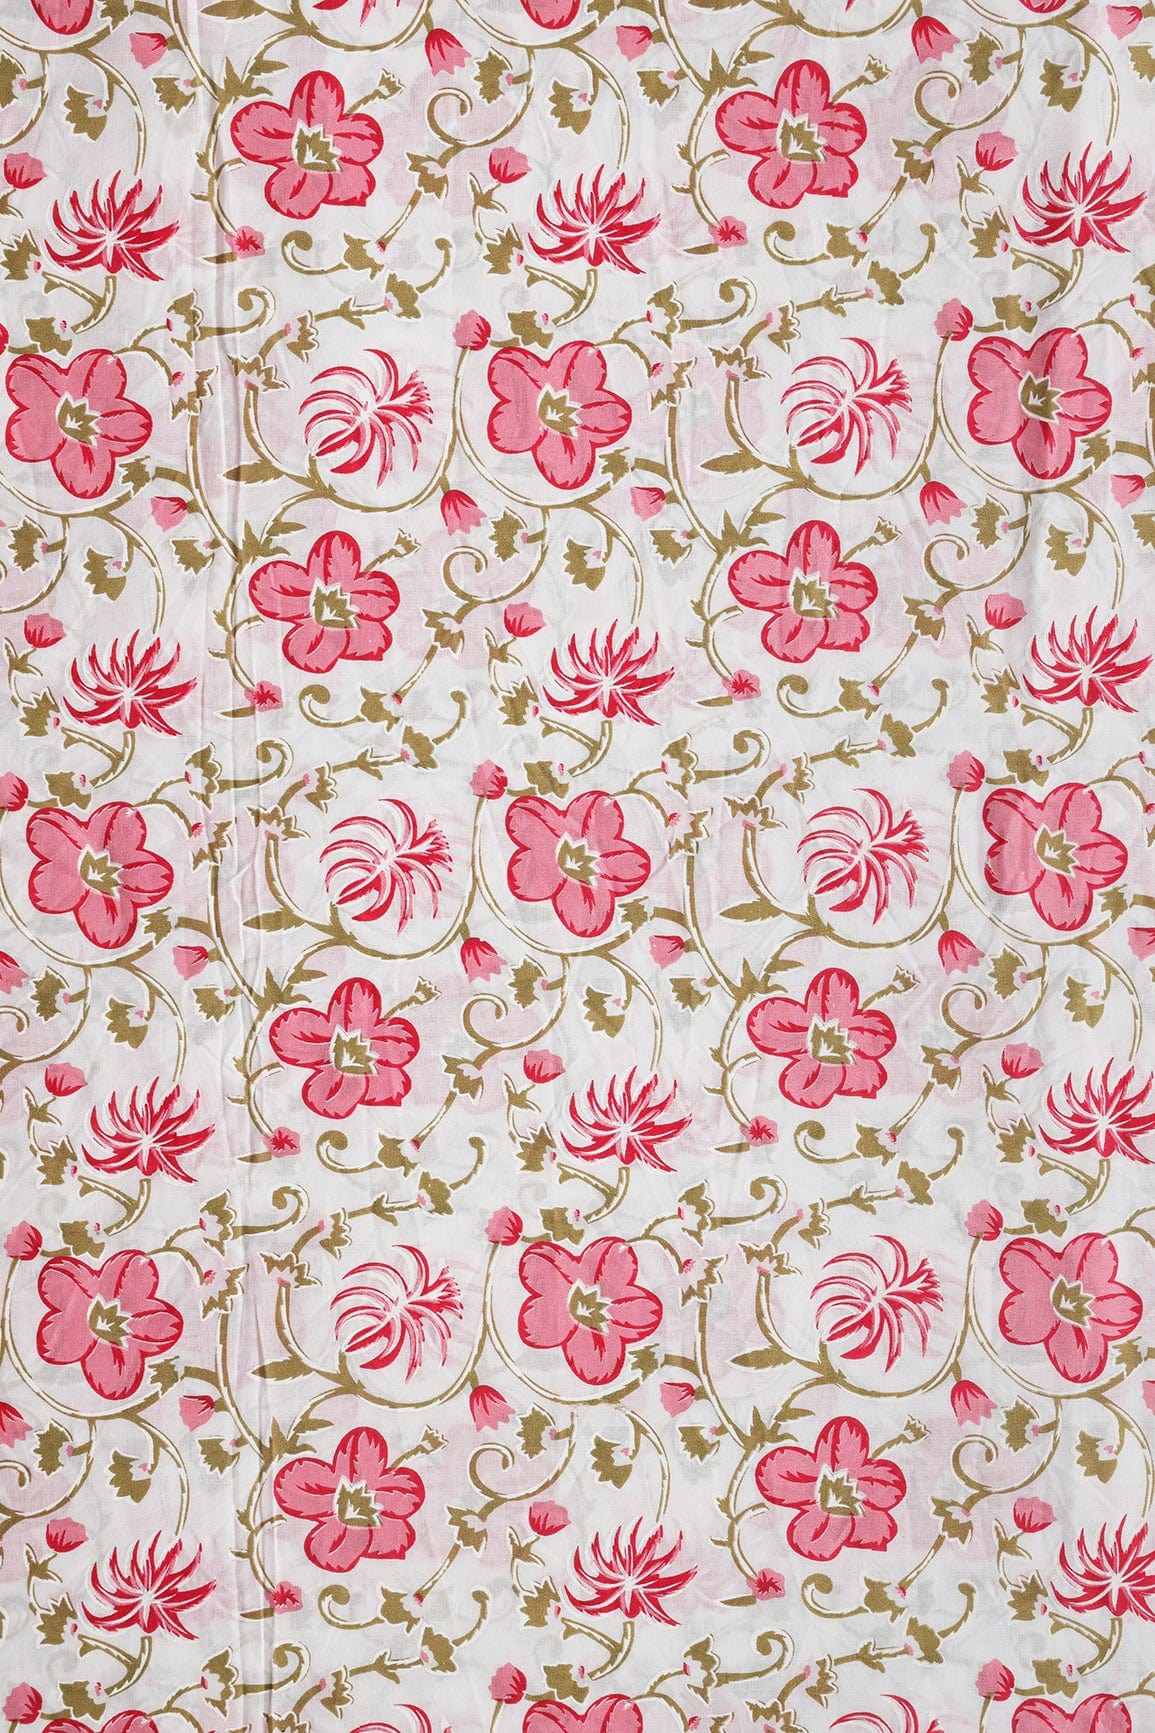 doeraa Prints Off White And Light Pink Floral Print On Pure Mul Cotton Fabric